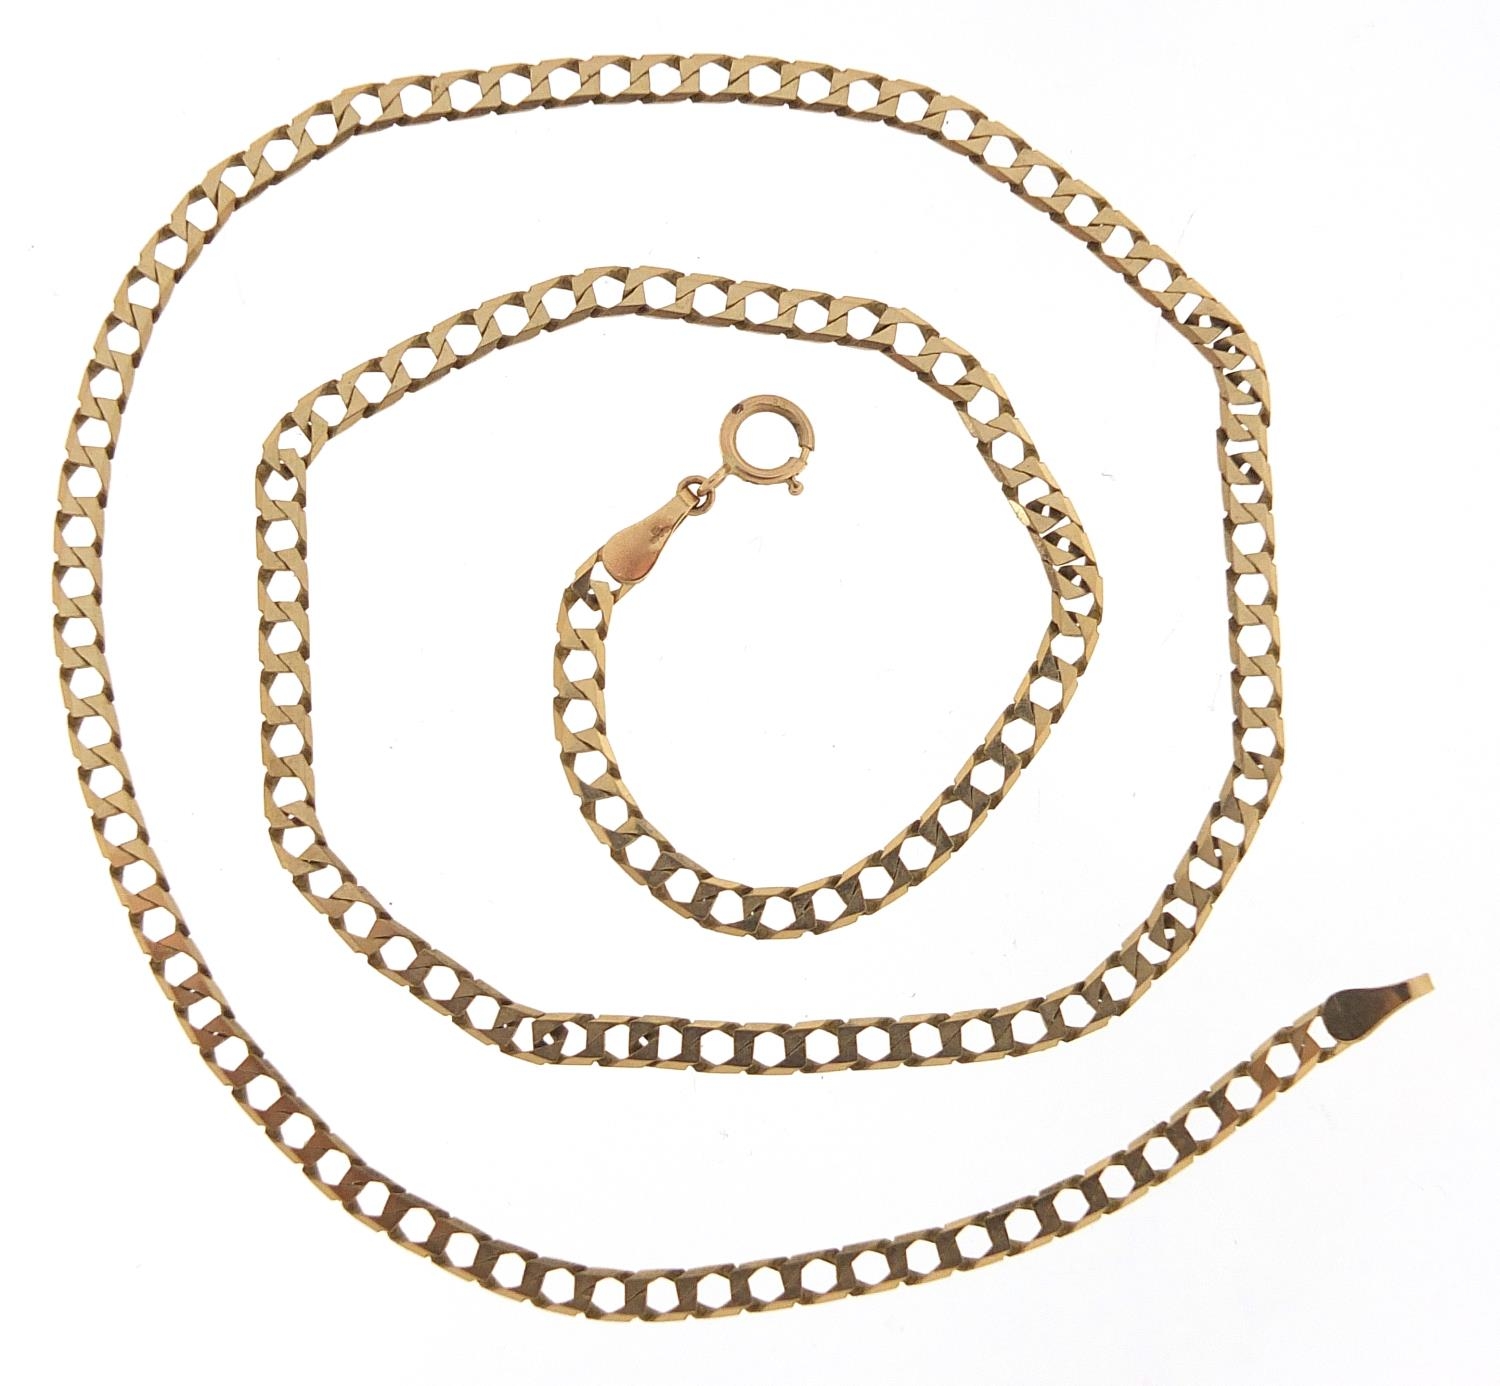 9ct gold curb link necklace, 46cm in length, 5.8g - this lot is sold without buyer's premium - Image 2 of 4